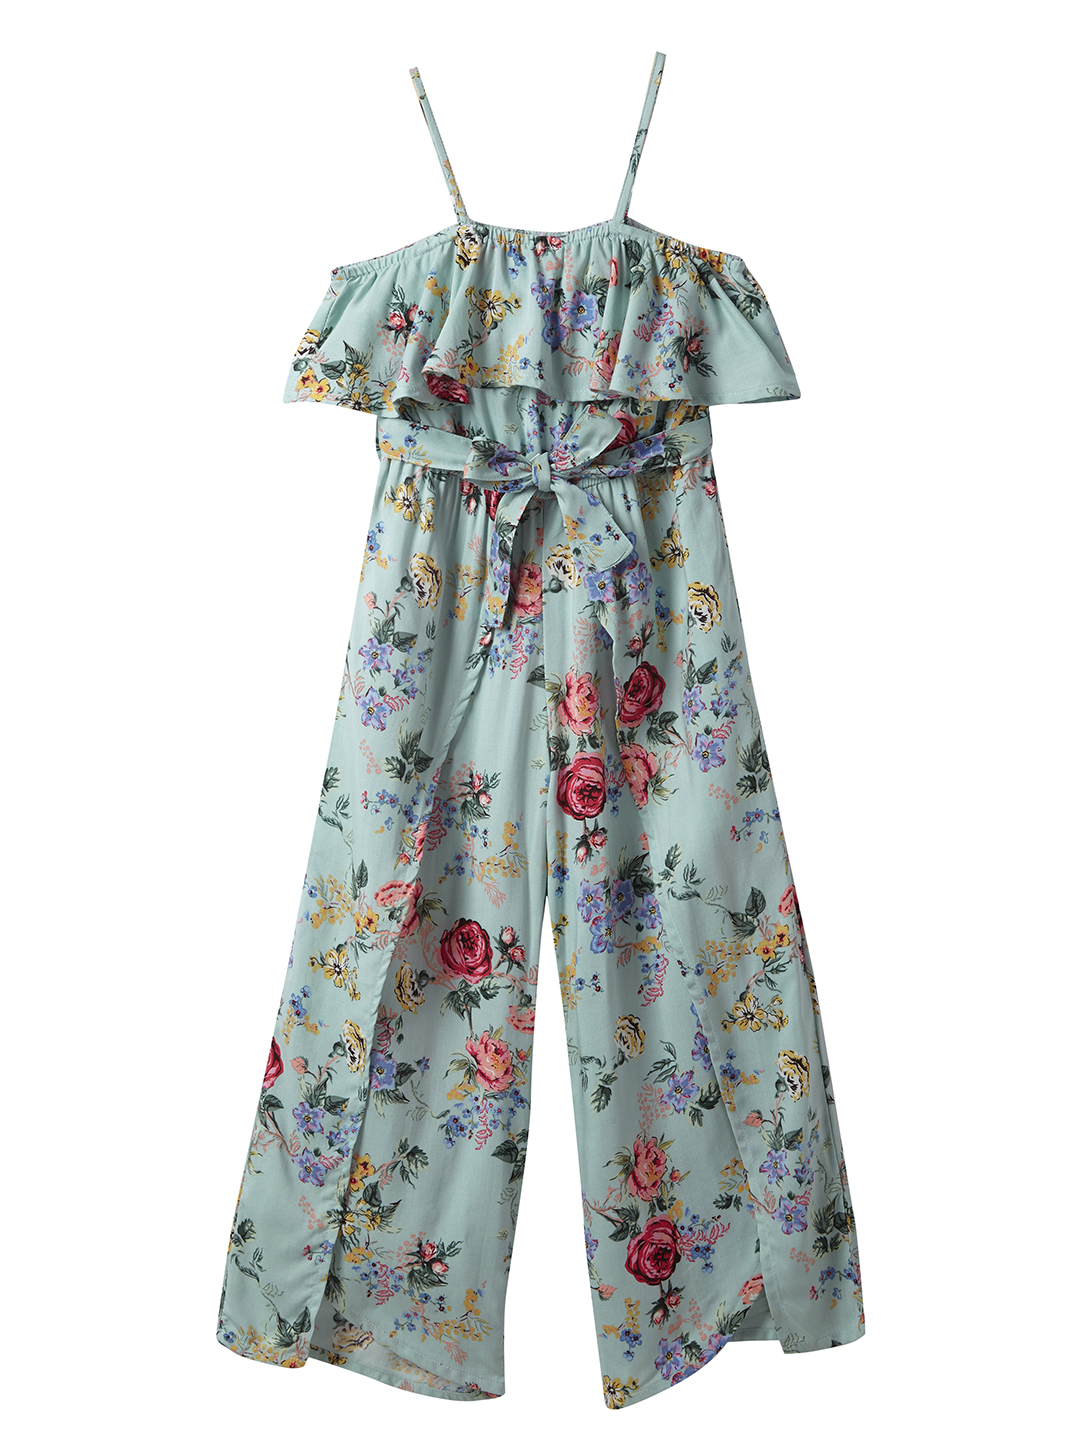 Purchase Floral Print Jumpsuit upto 12 Years Girl